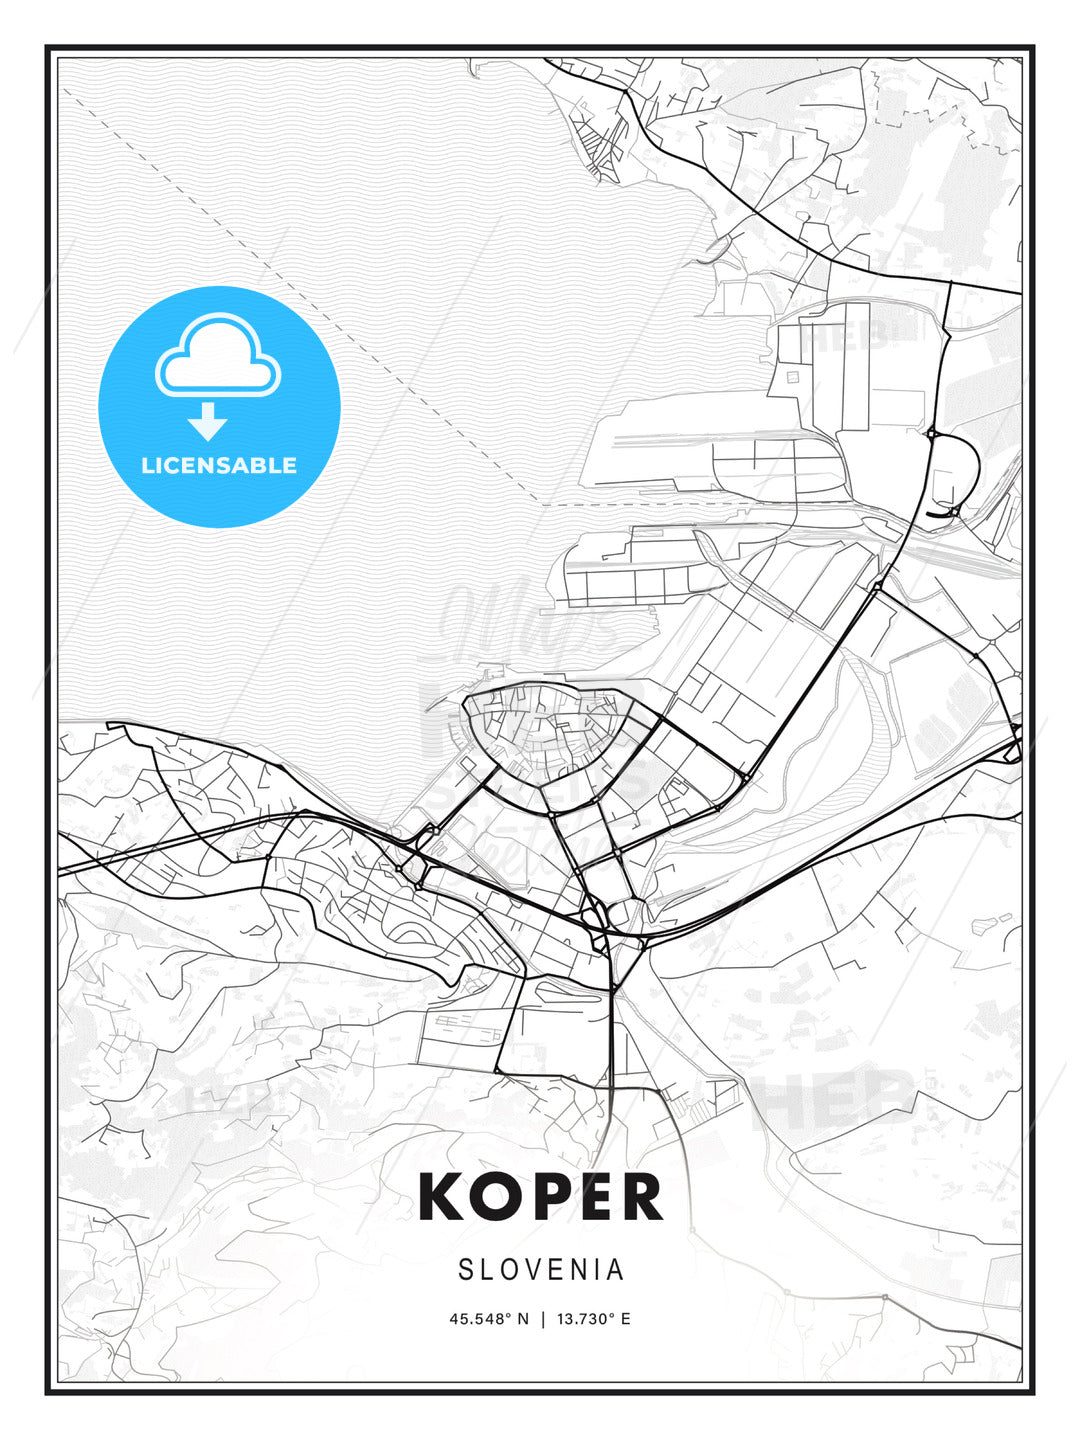 Koper, Slovenia, Modern Print Template in Various Formats - HEBSTREITS Sketches